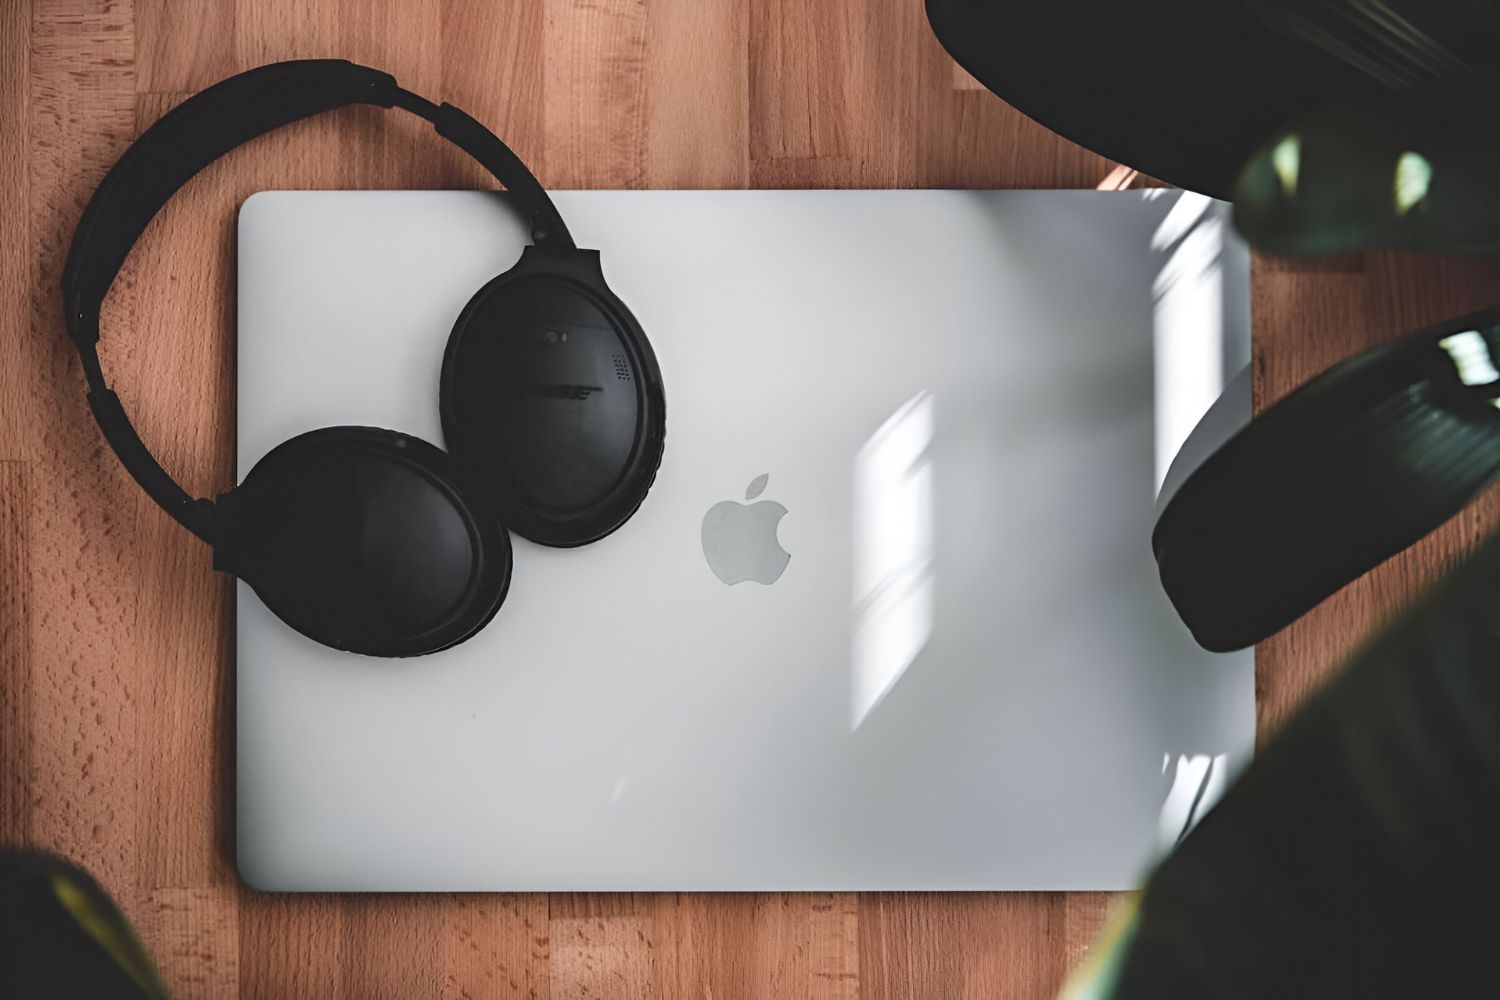 How To Pair Sony Noise Cancelling Headphones To Mac